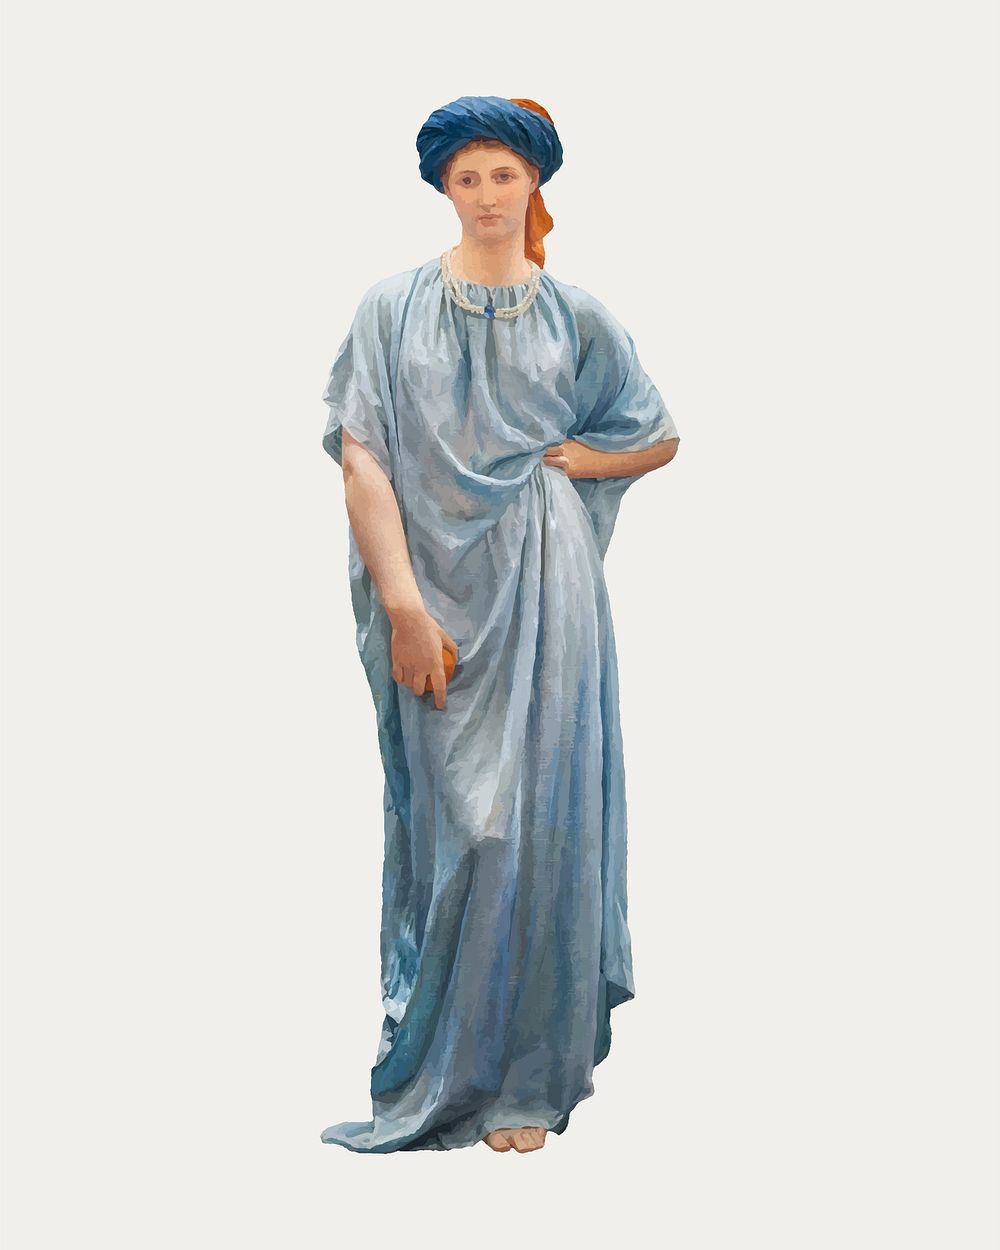 Vintage woman in blue dress sticker vector, remixed from the artworks by Albert Joseph Moore